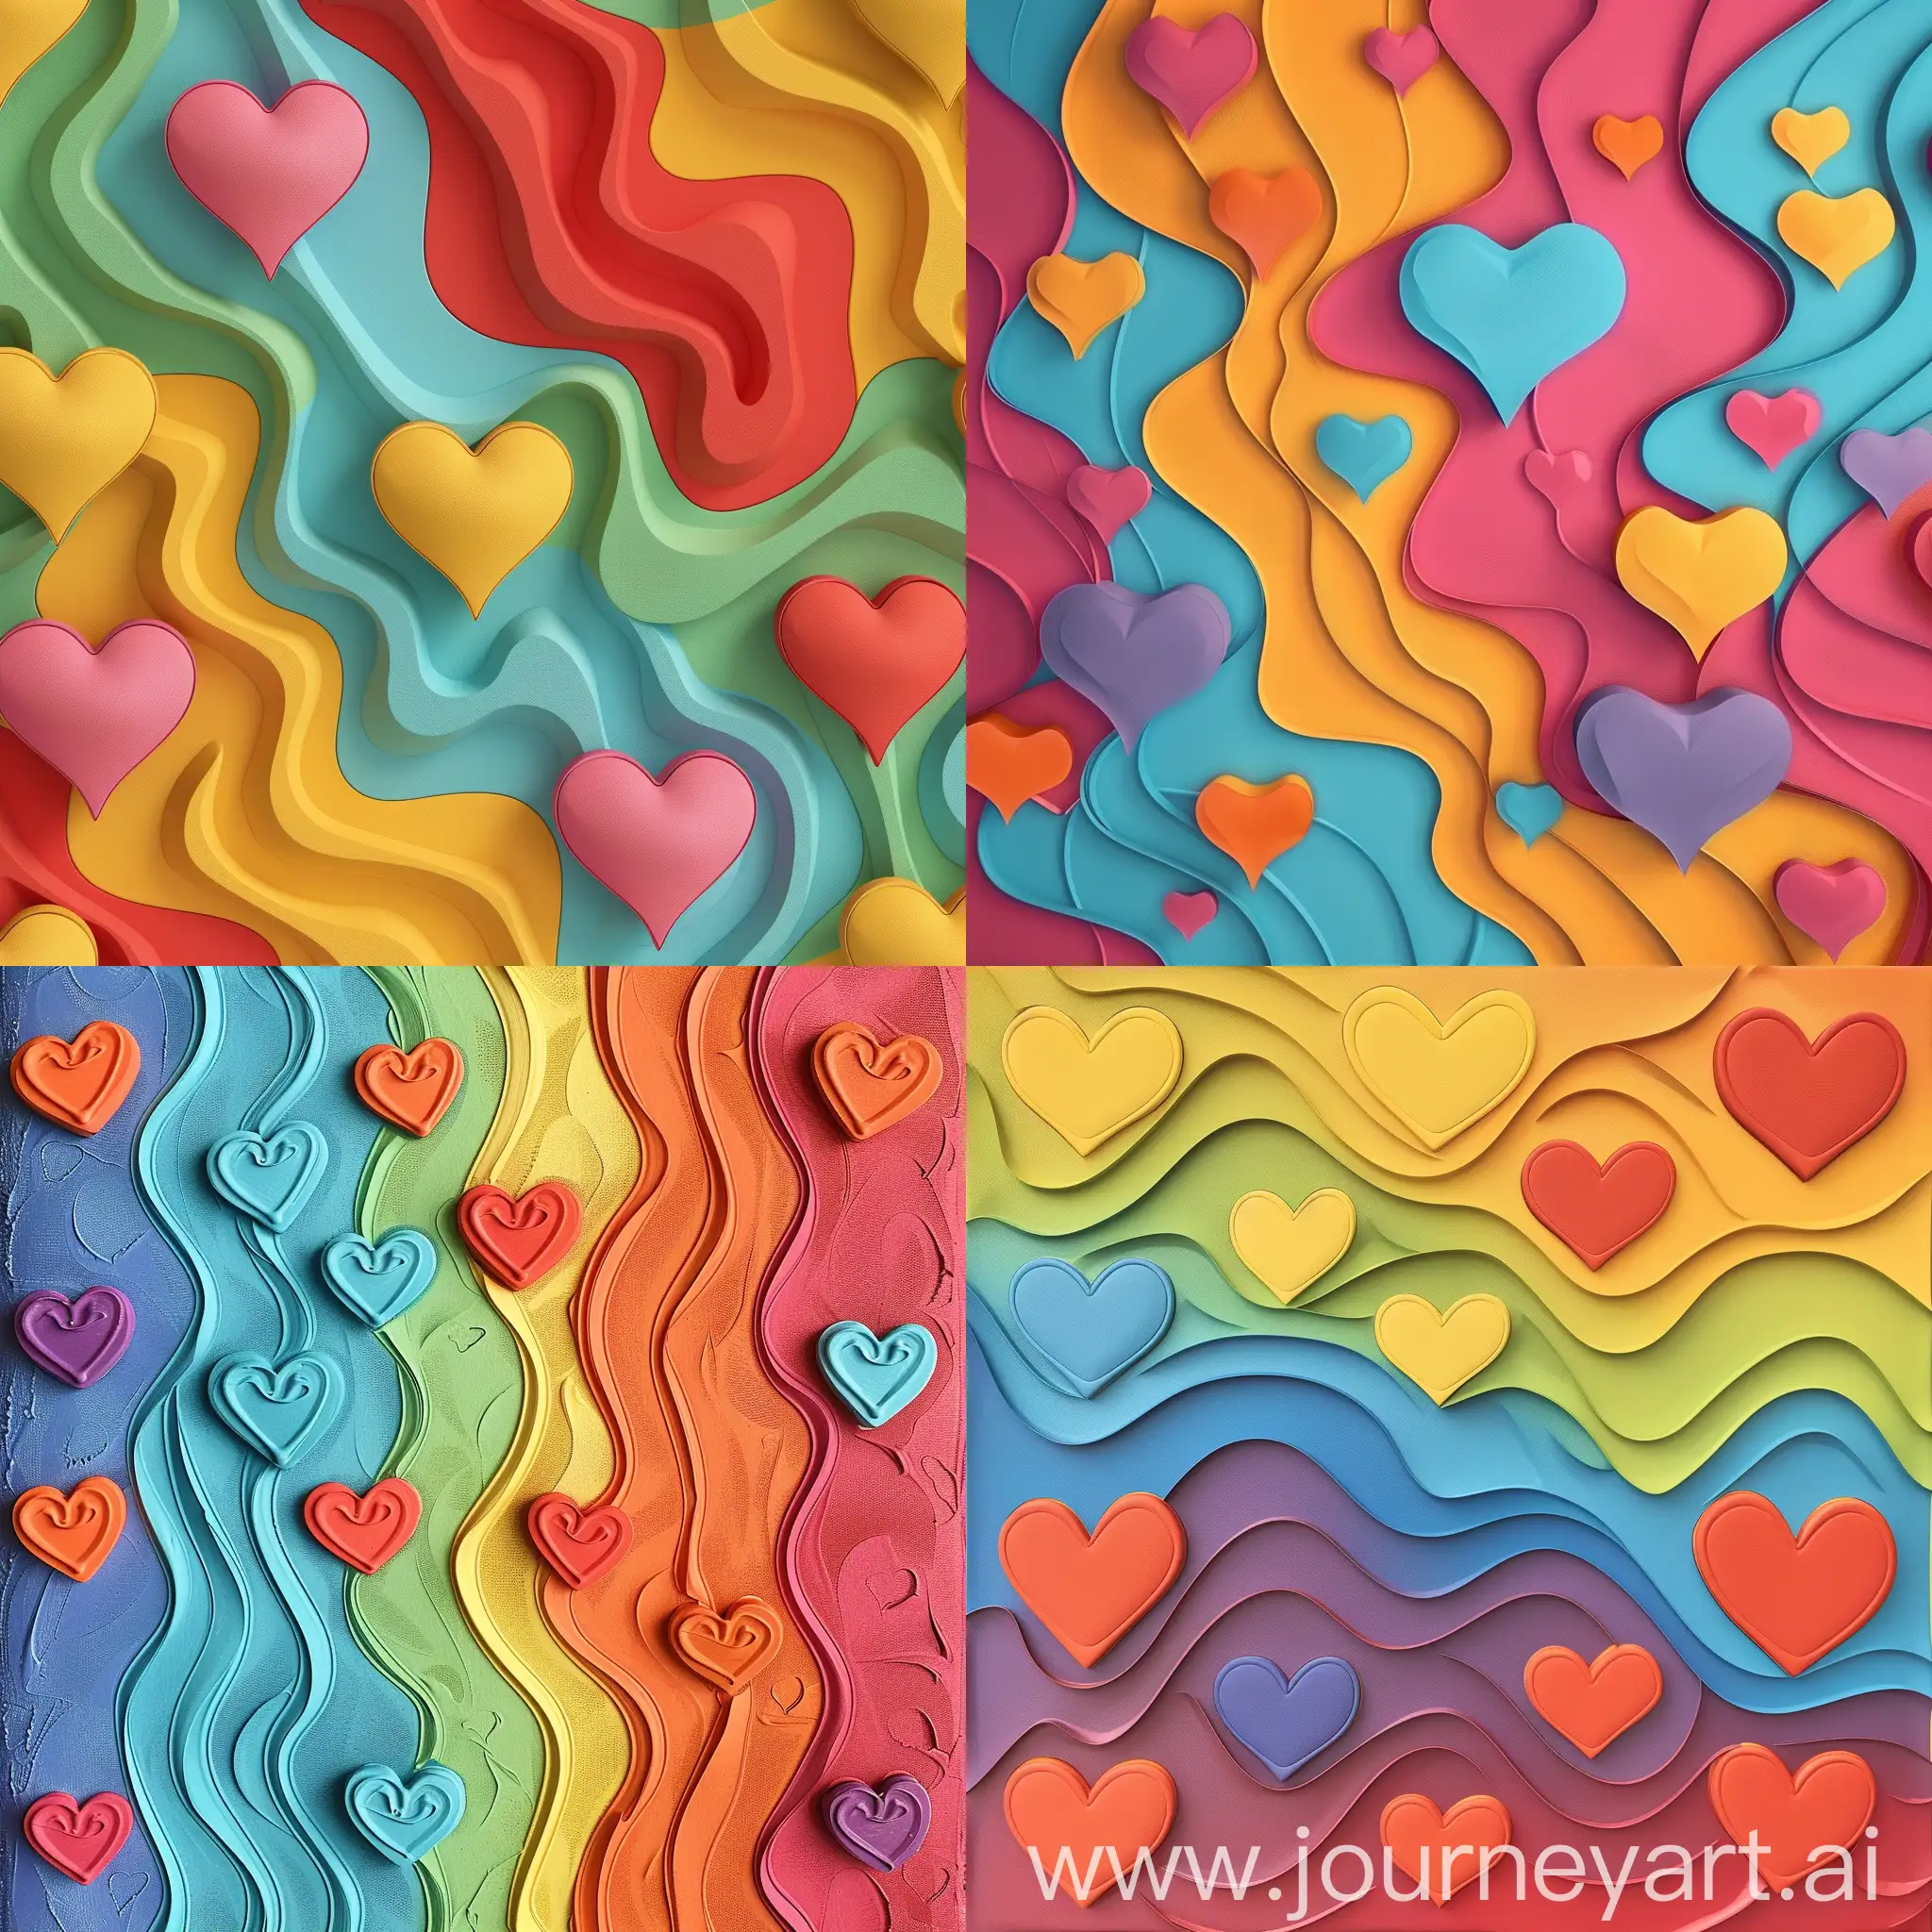 Wavy texture pattern of hearts on a blank colorful background.--ar 9:16 --style raw